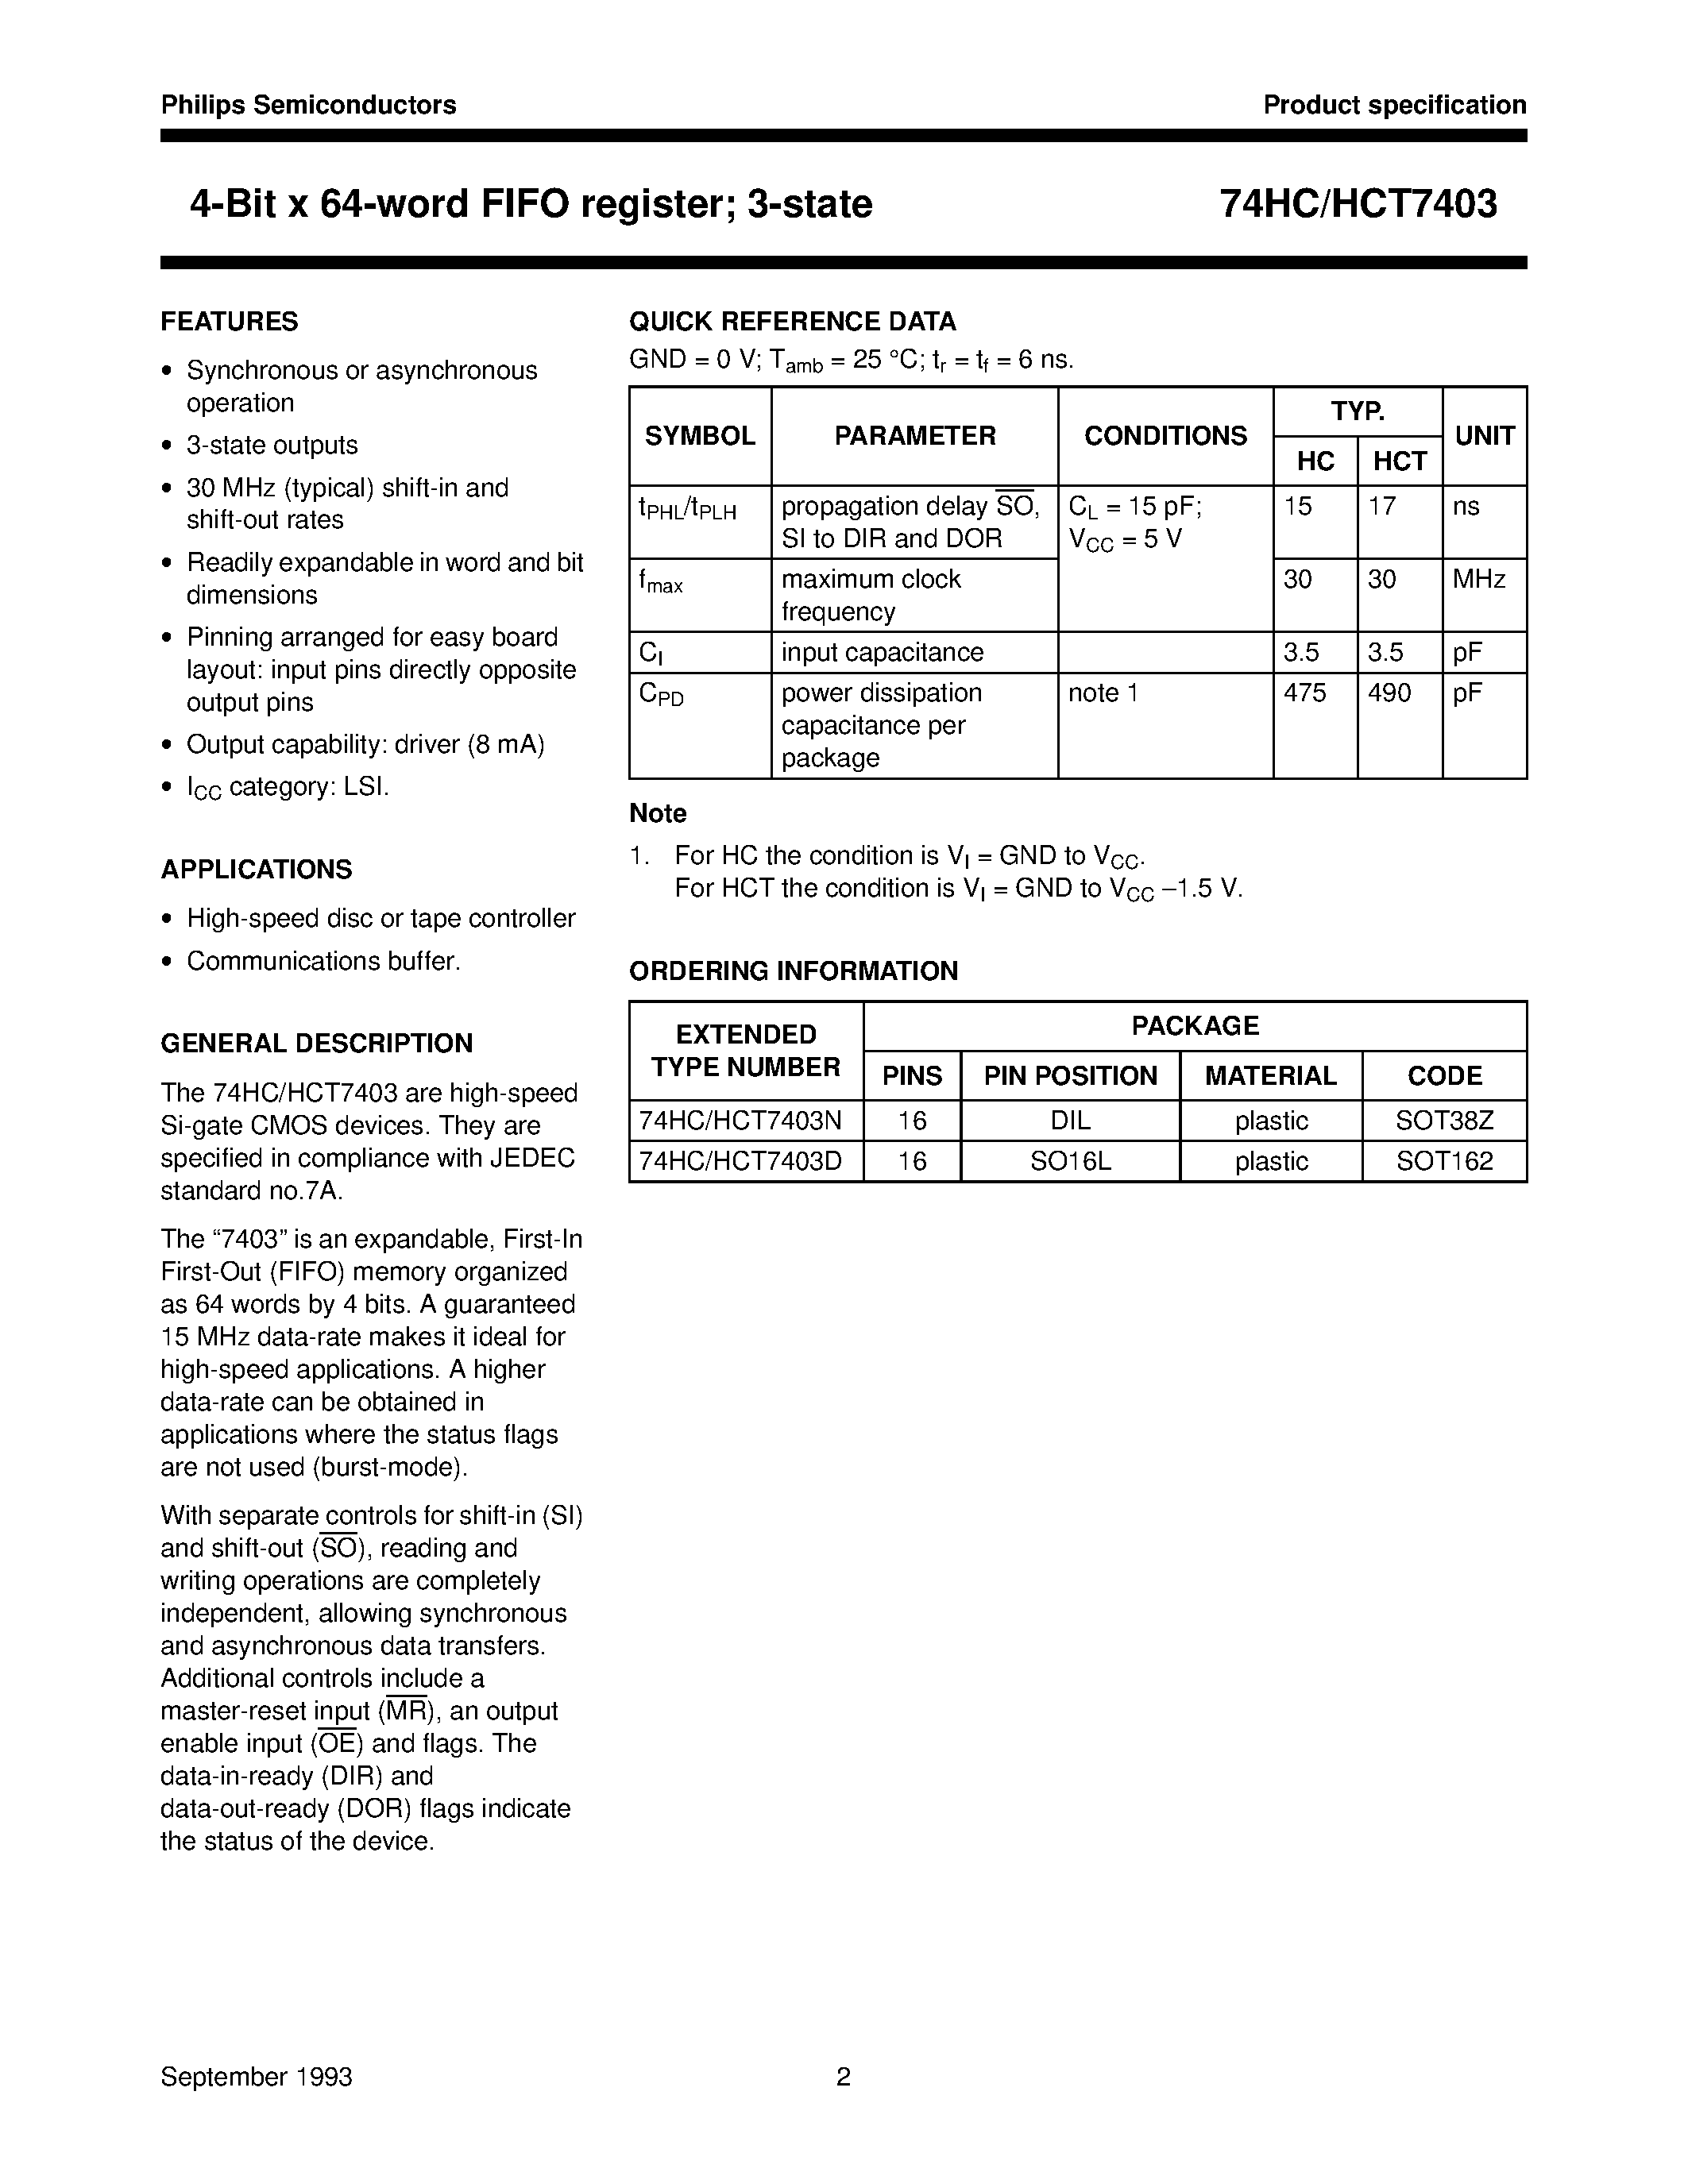 Datasheet 74HCT7403 - 4-Bit x 64-word FIFO register; 3-state page 2